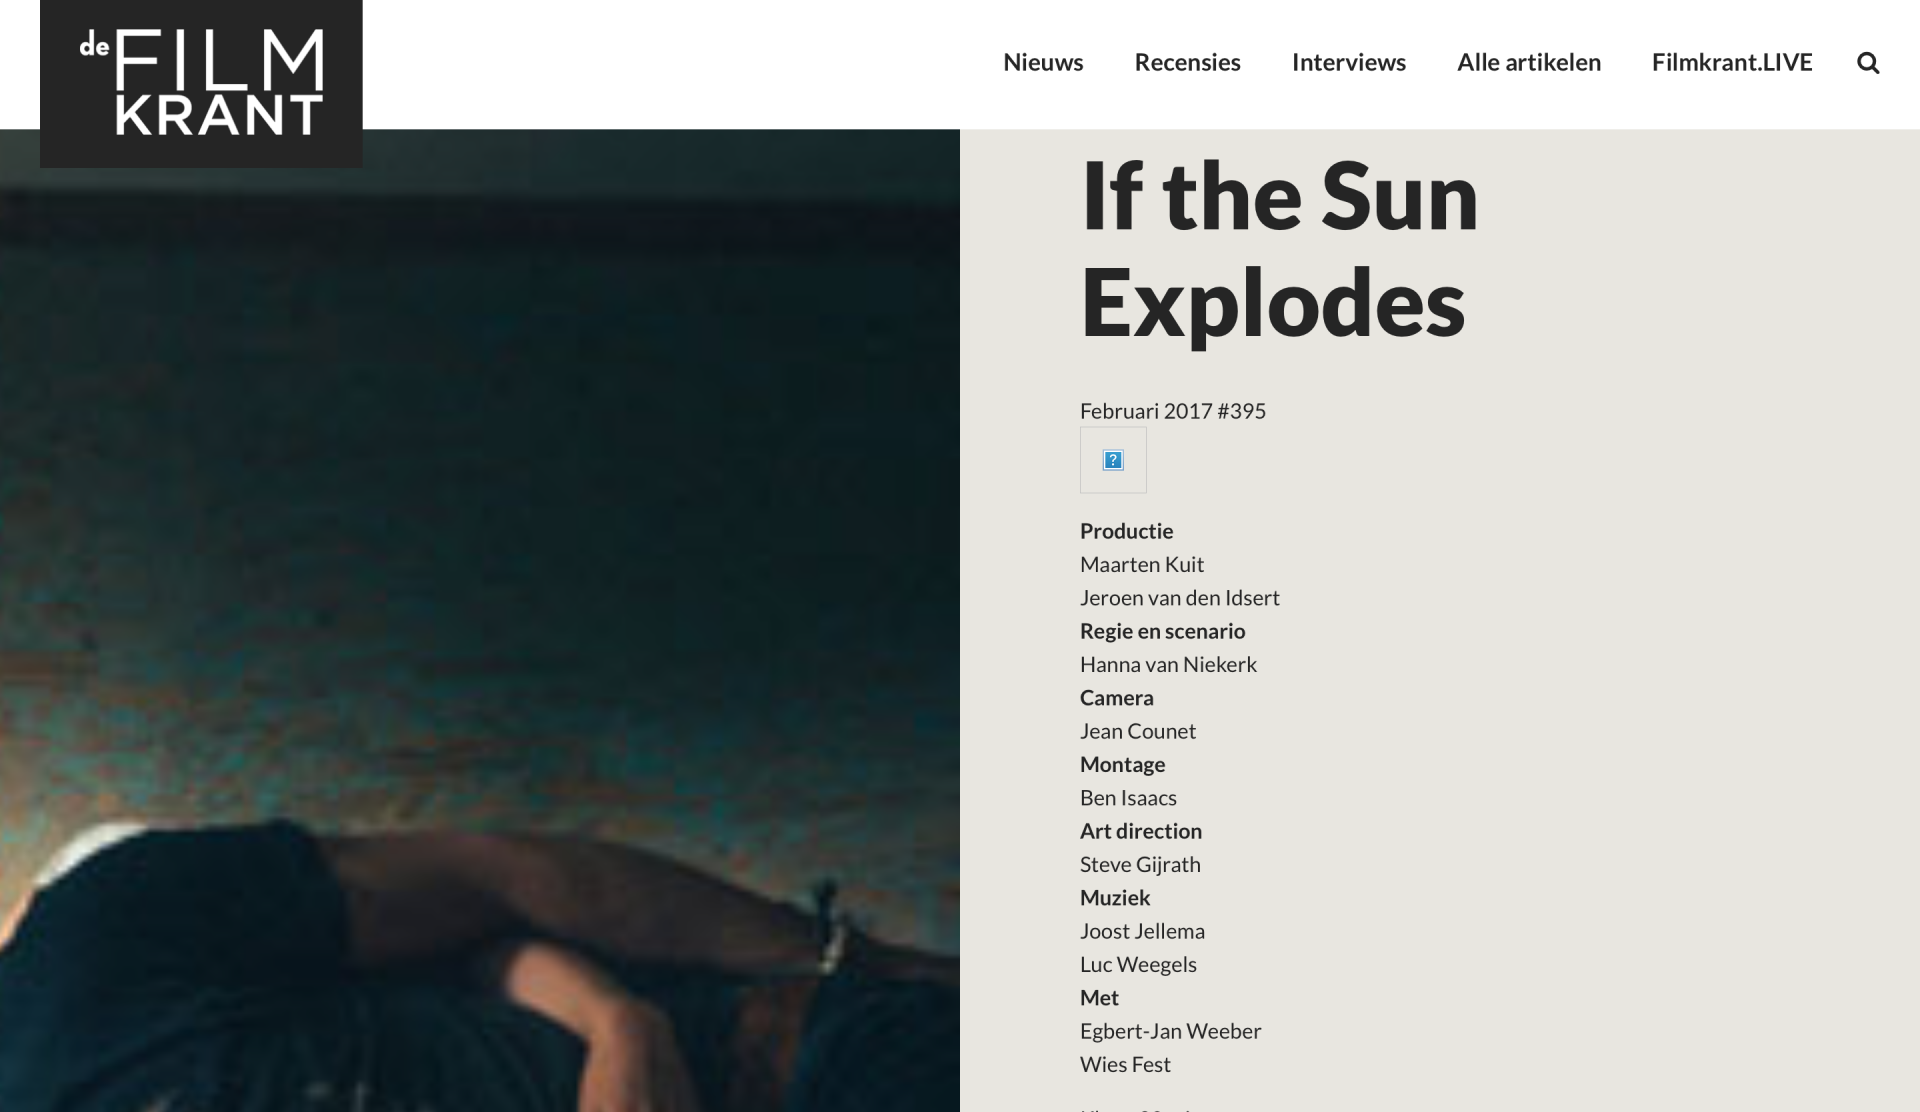 If the sun explodes